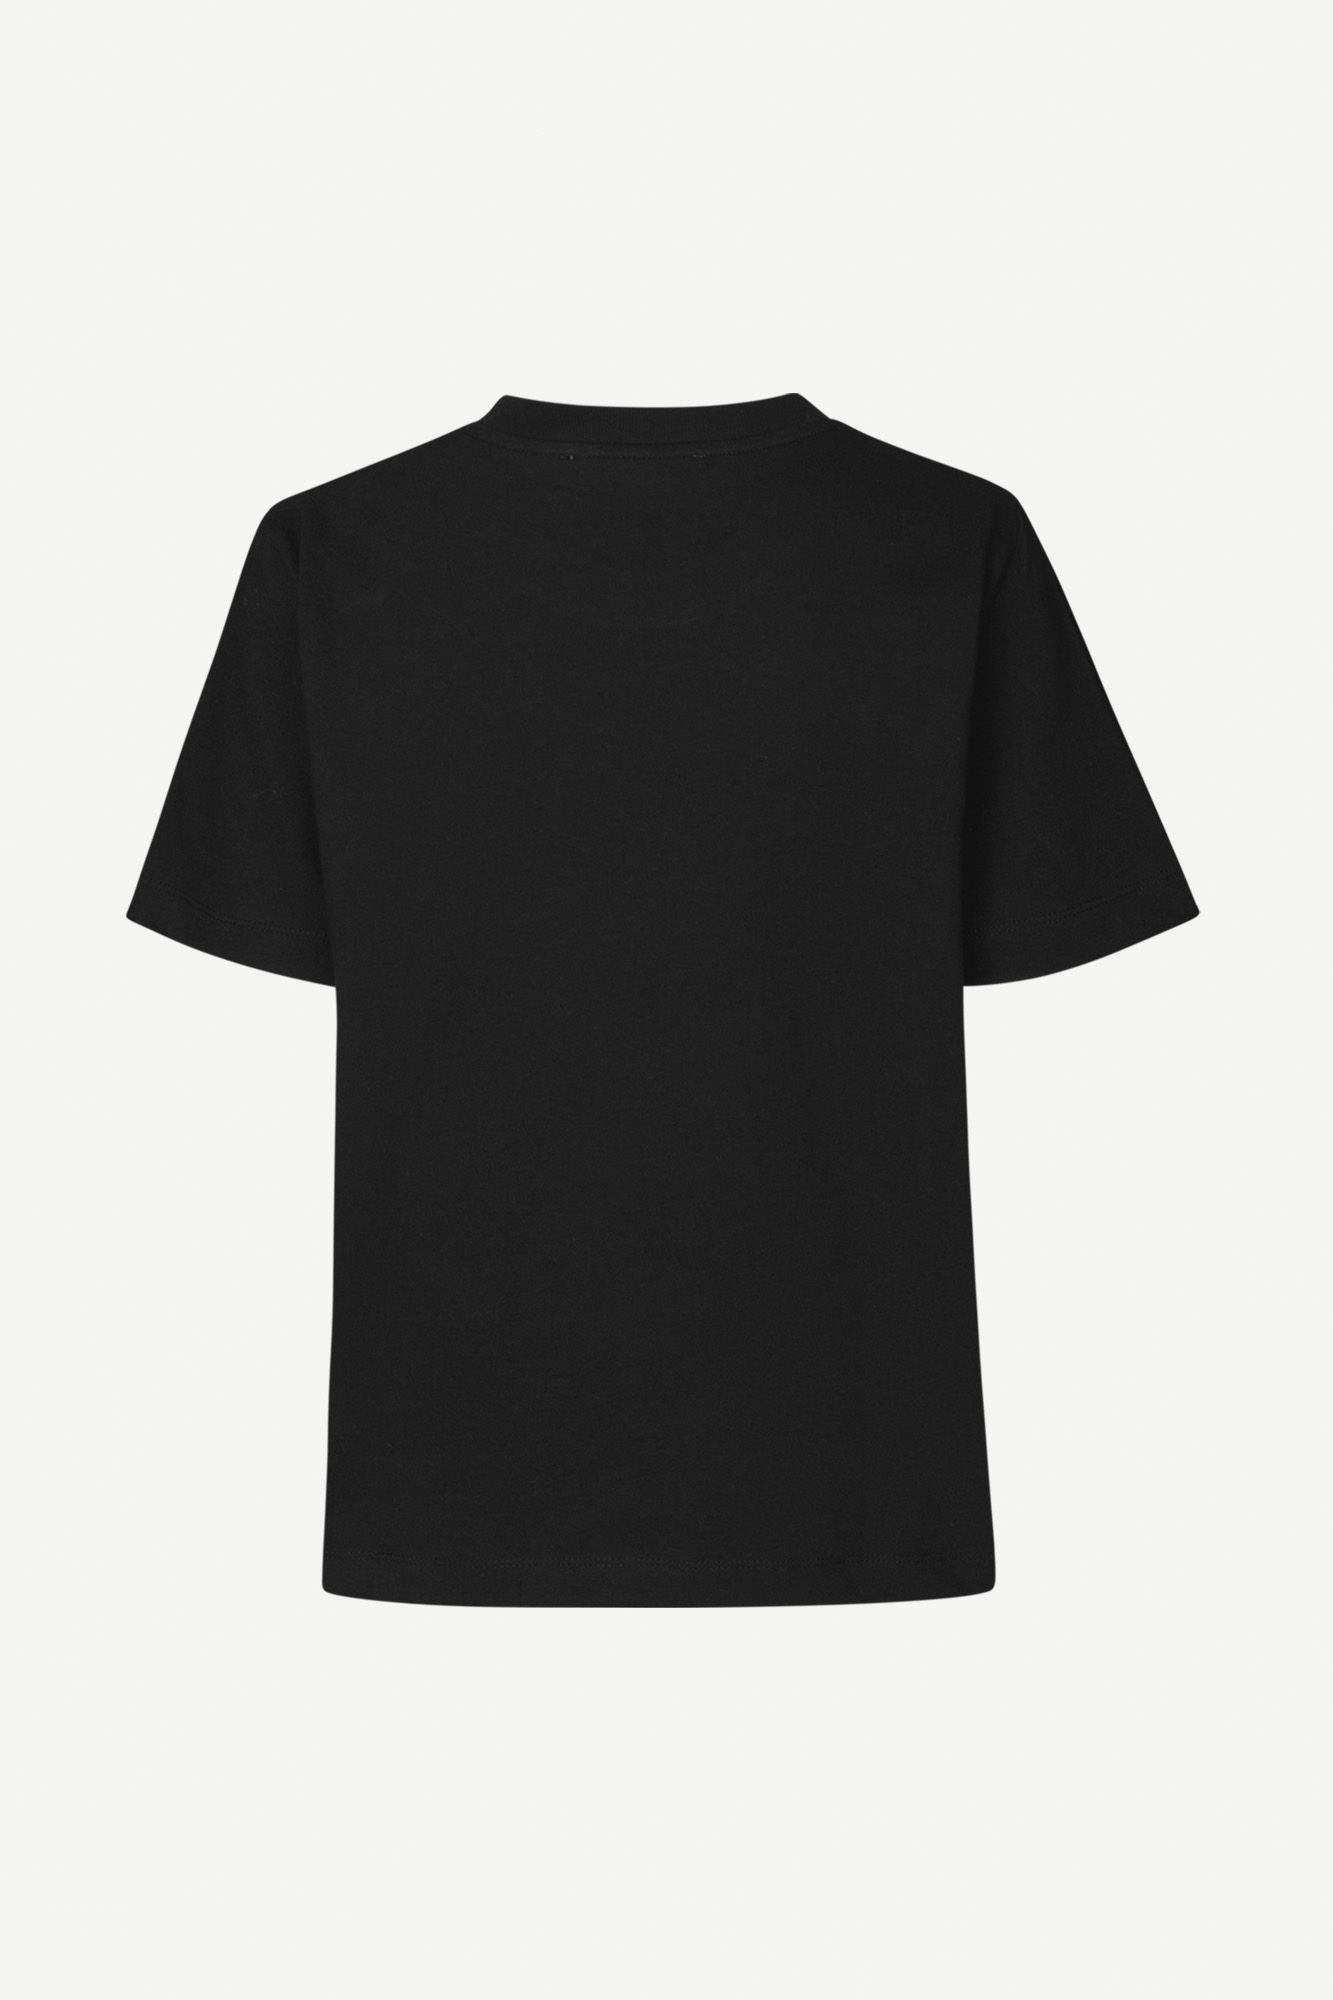 Boxy cotton t-shirt in black